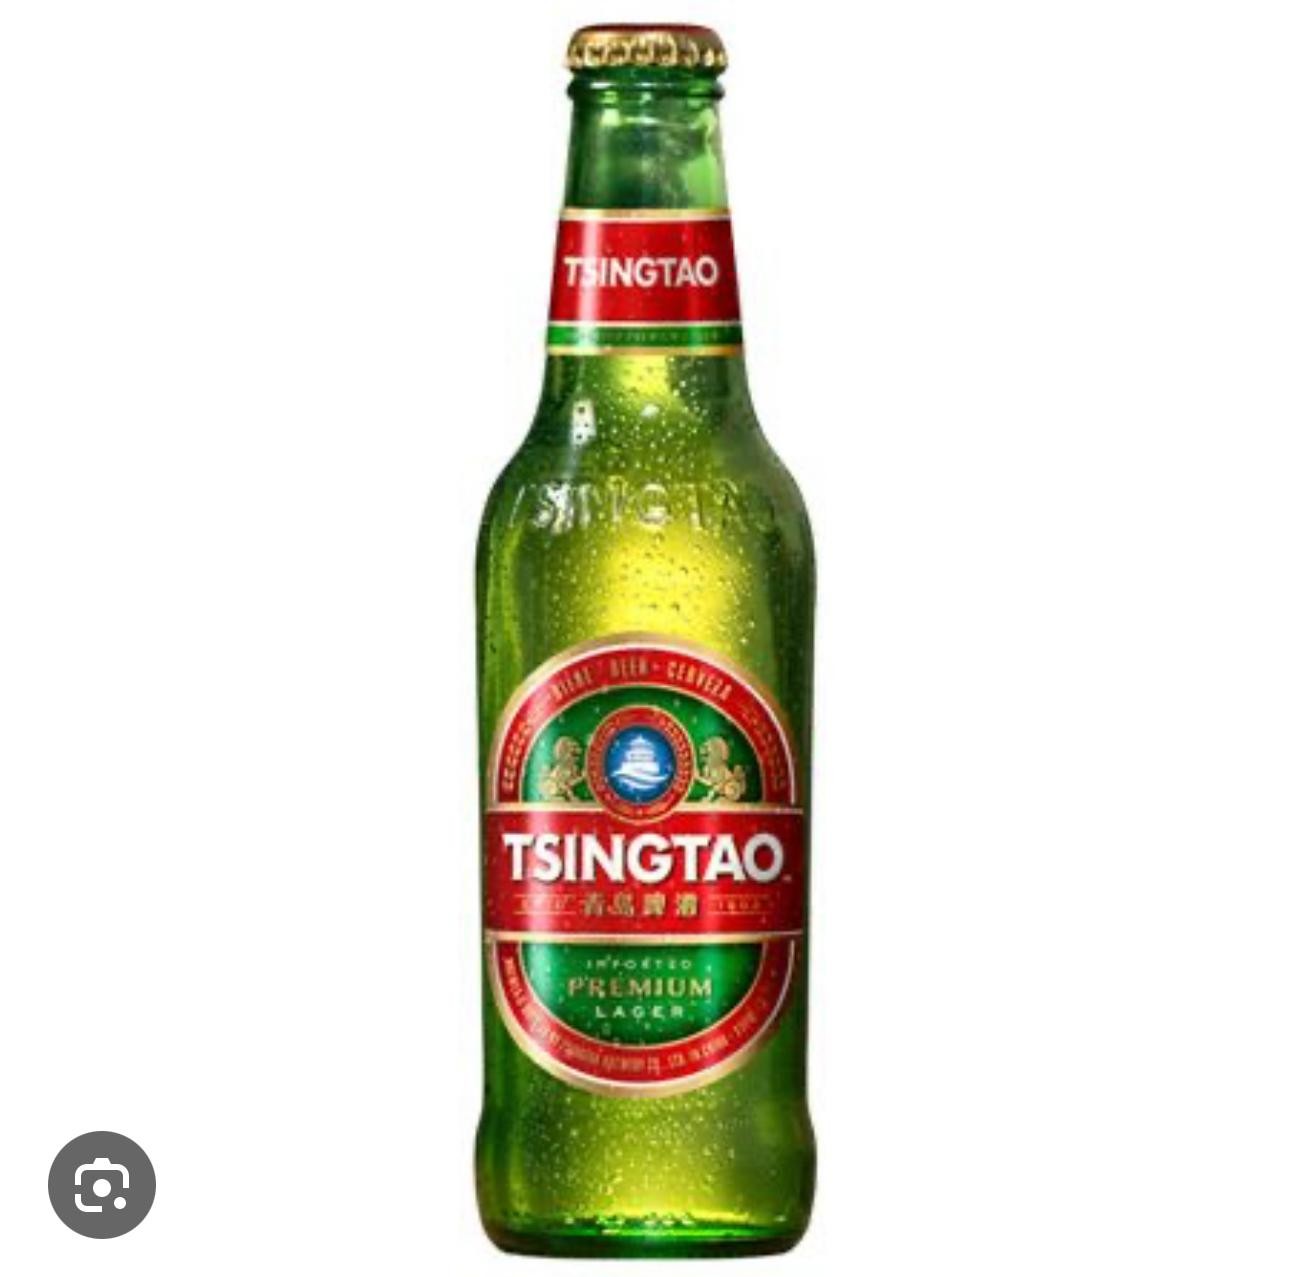 TsingTao (must be 21+ to be purchase)